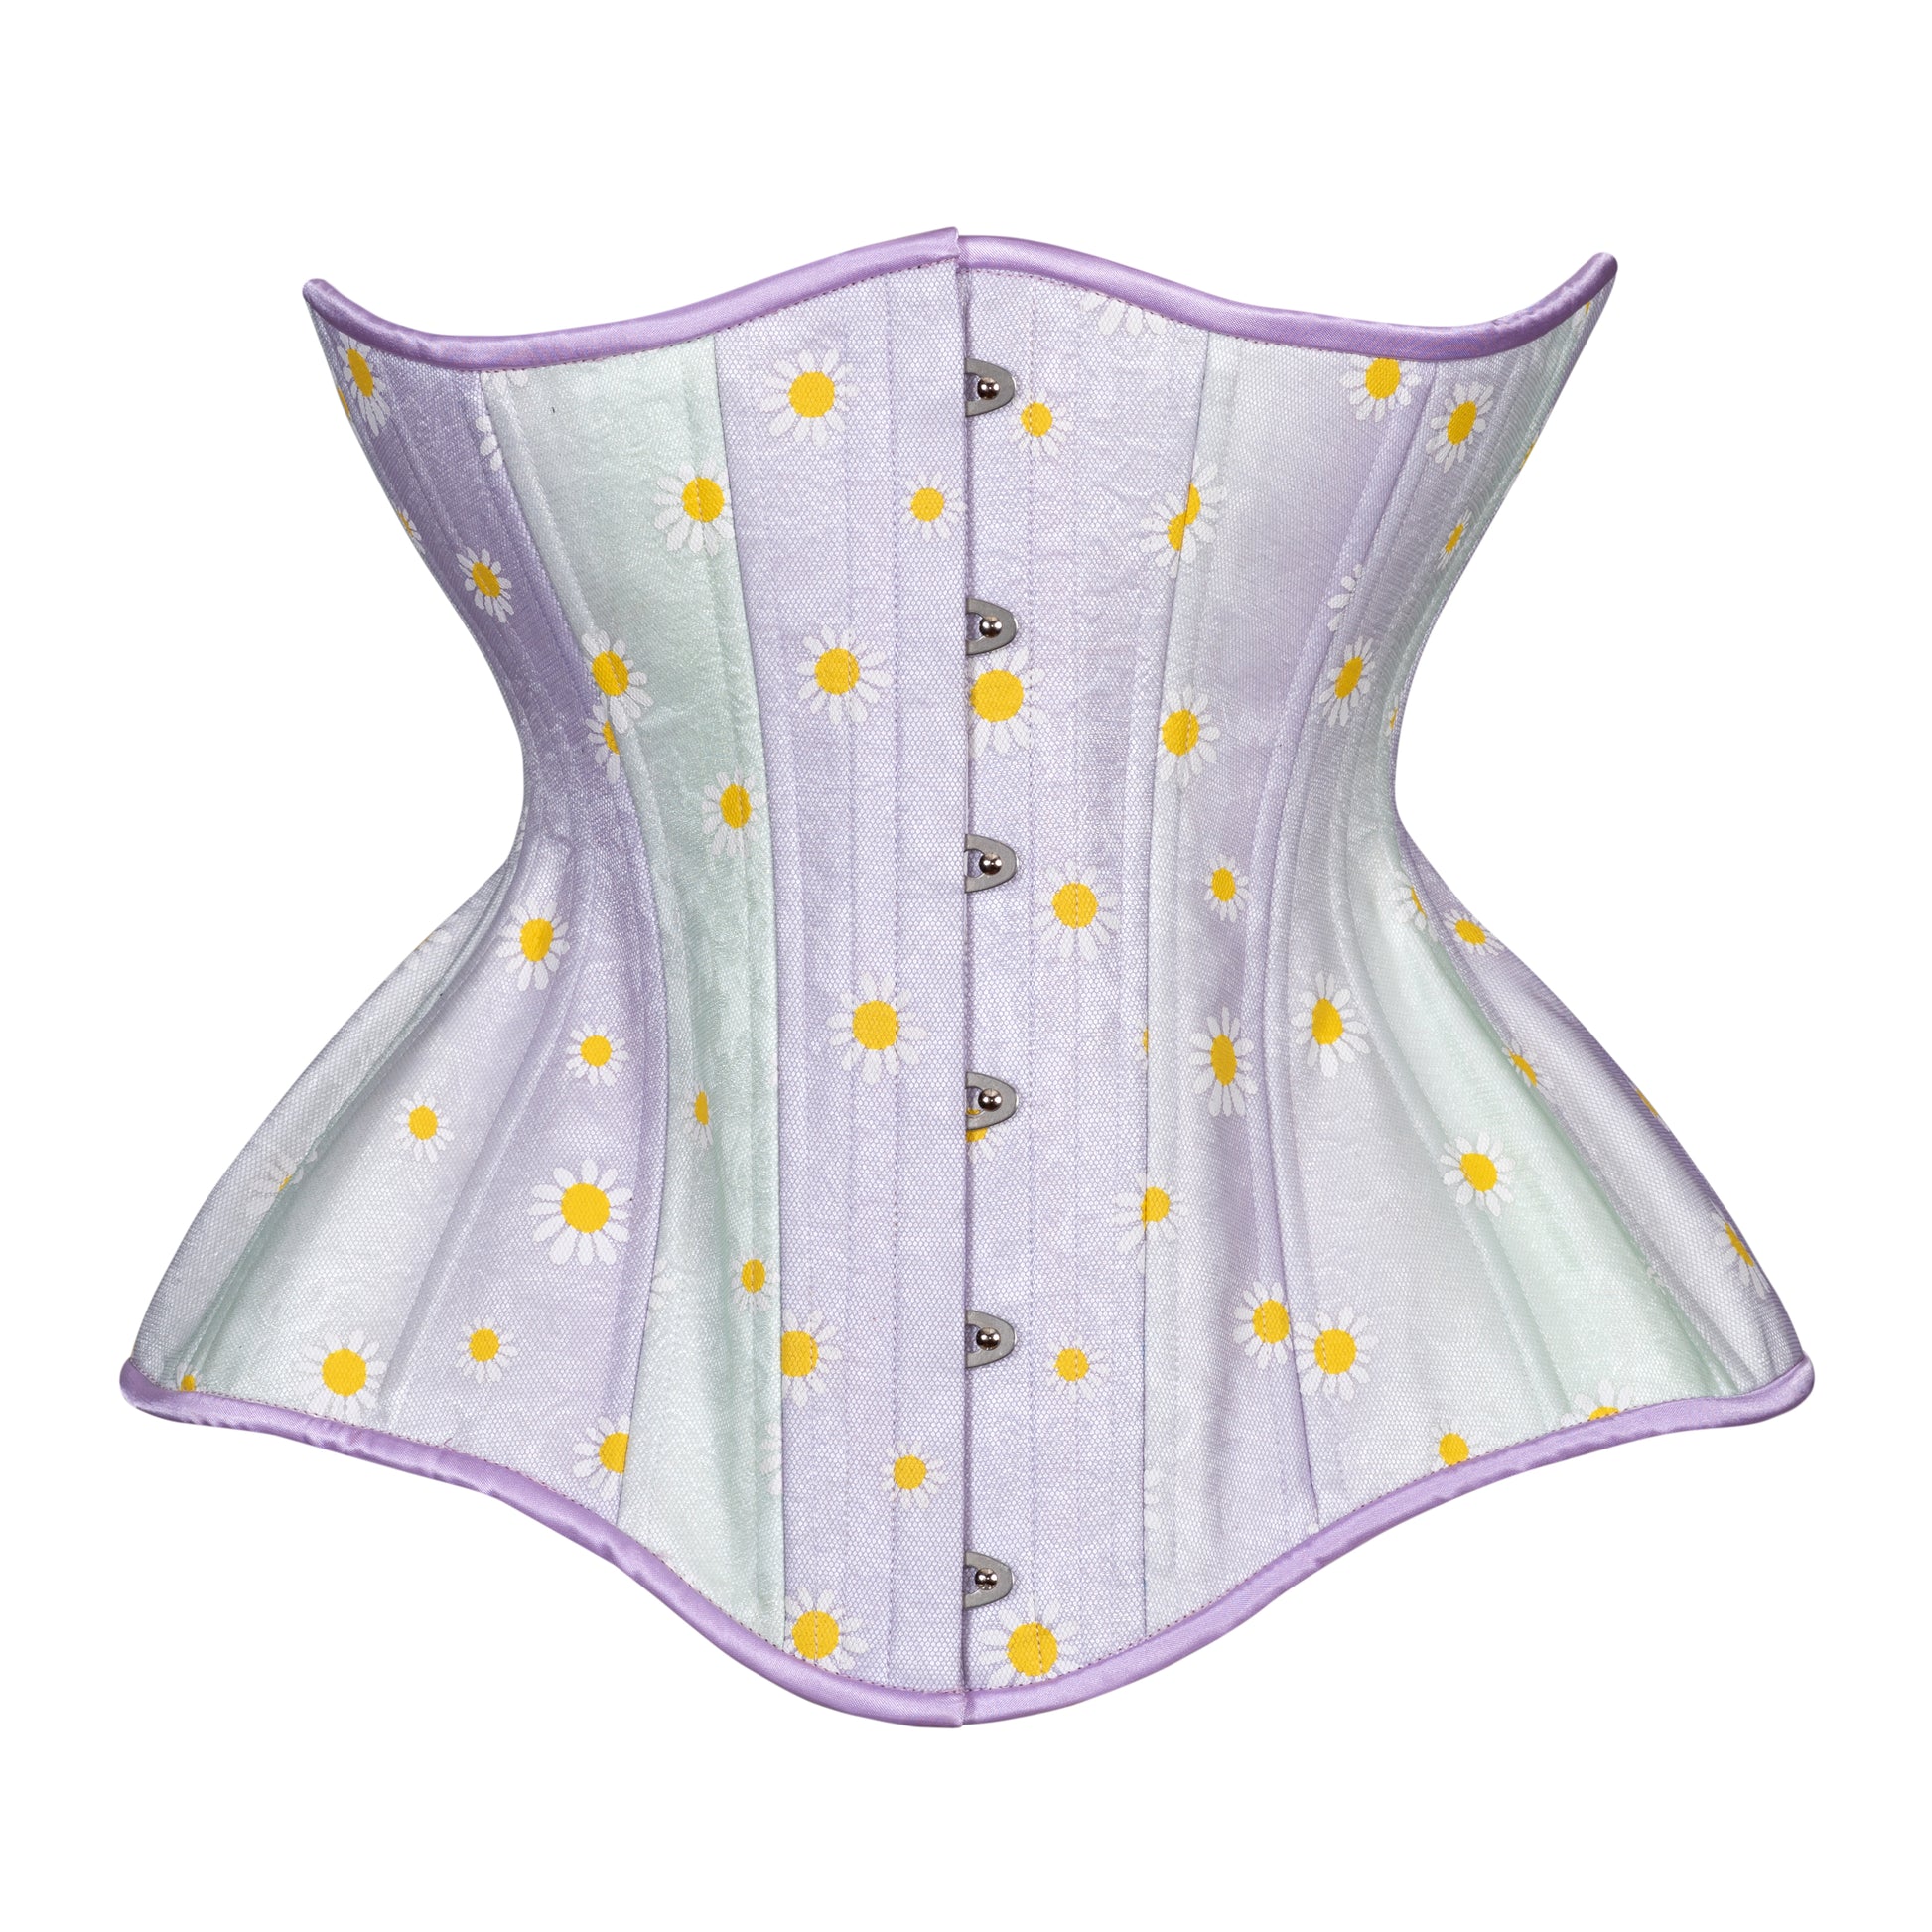 Preventing your belly from falling out below your corset – Lucy's Corsetry